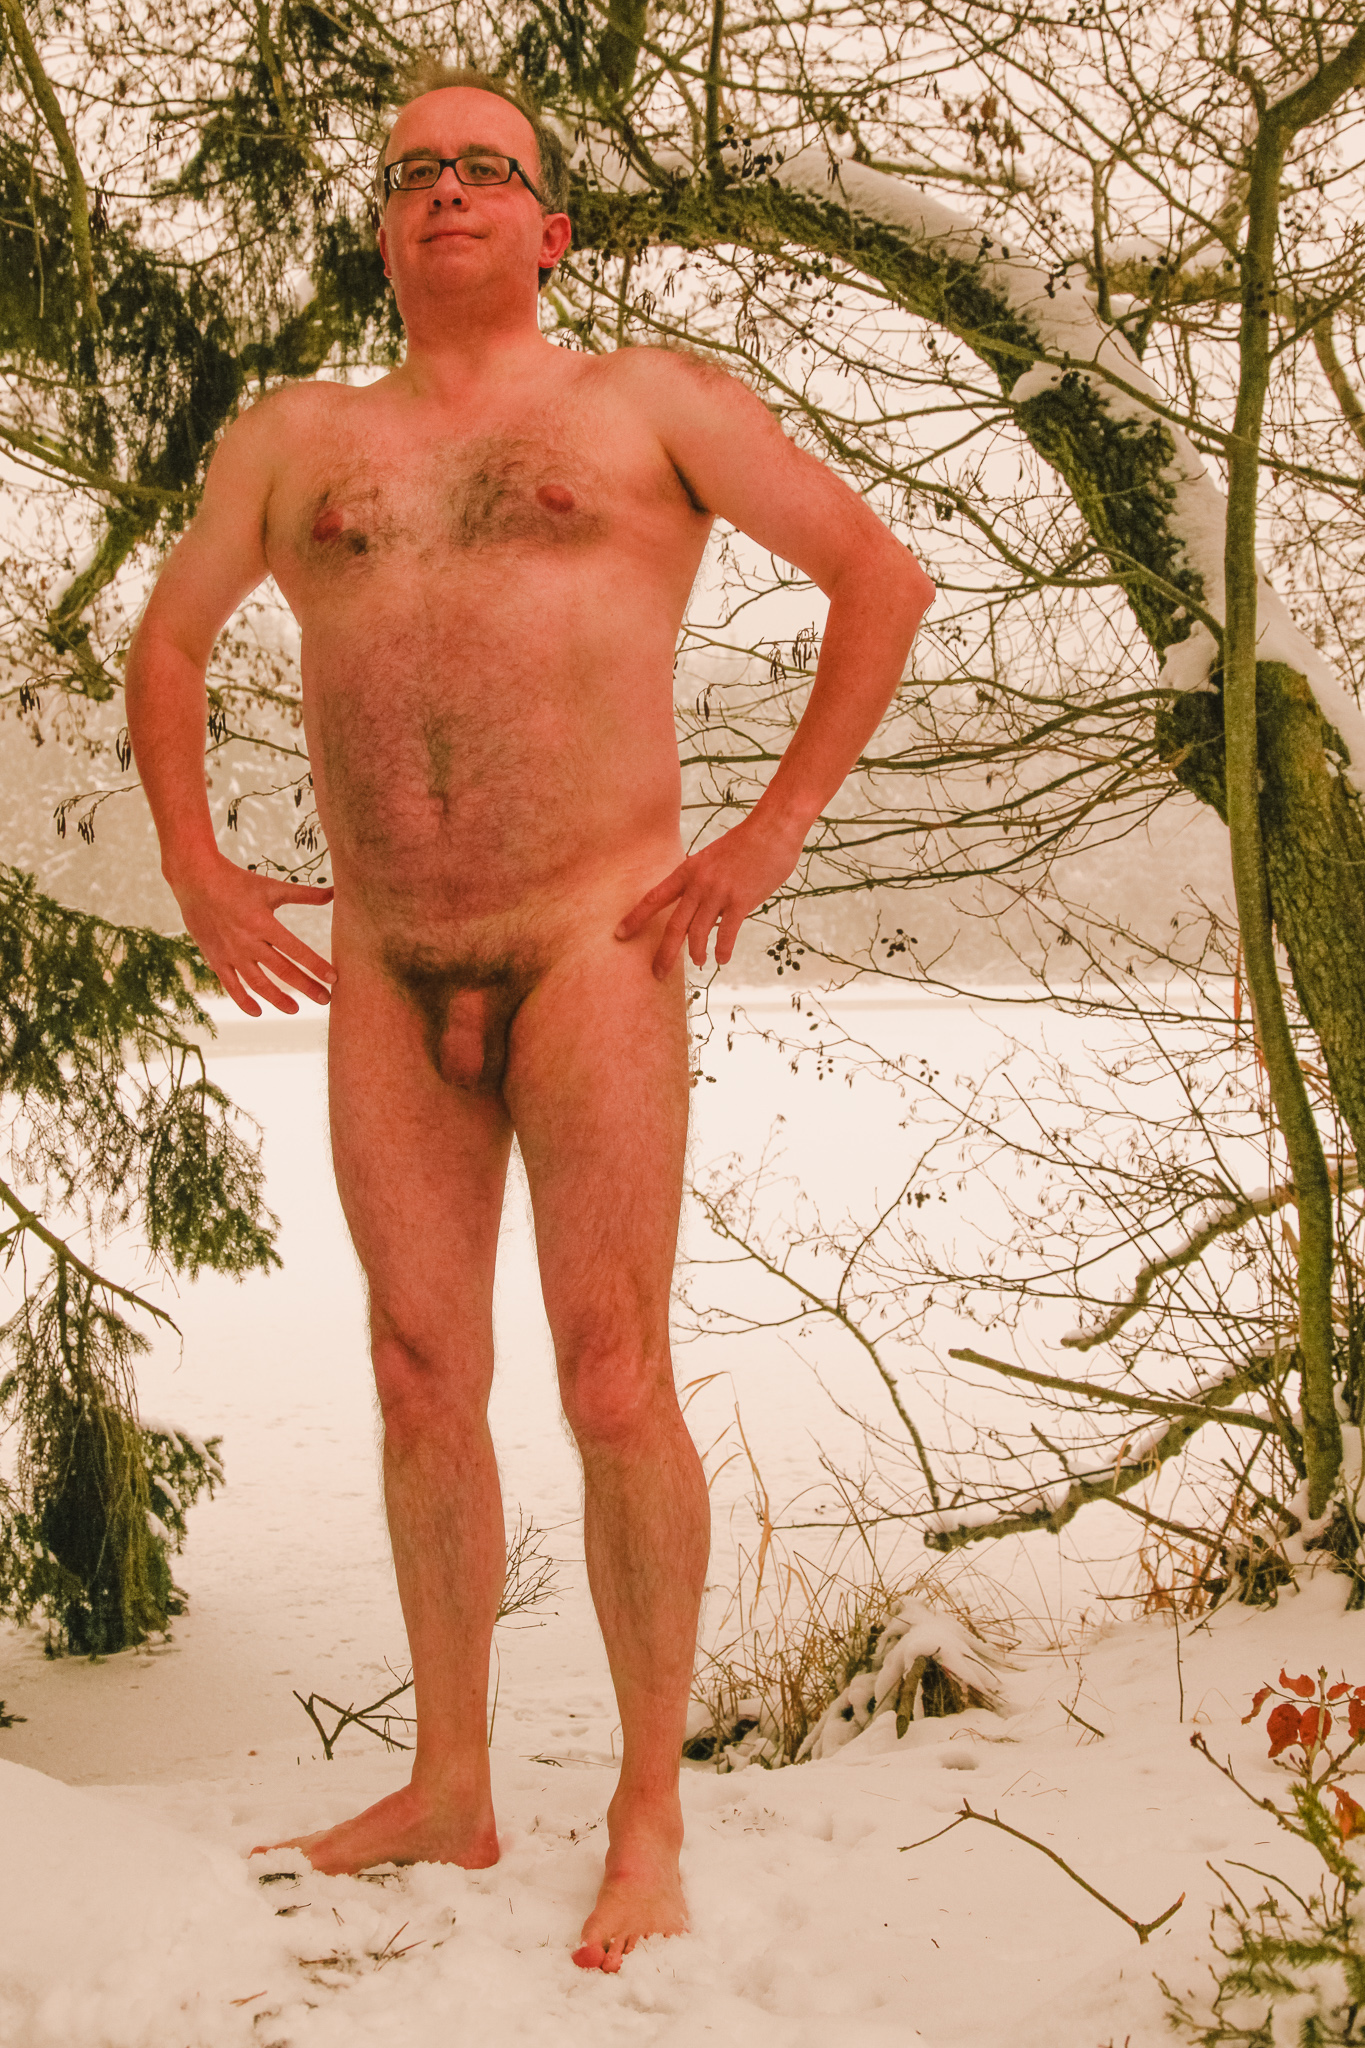 Stark naked and barefoot in the January snow